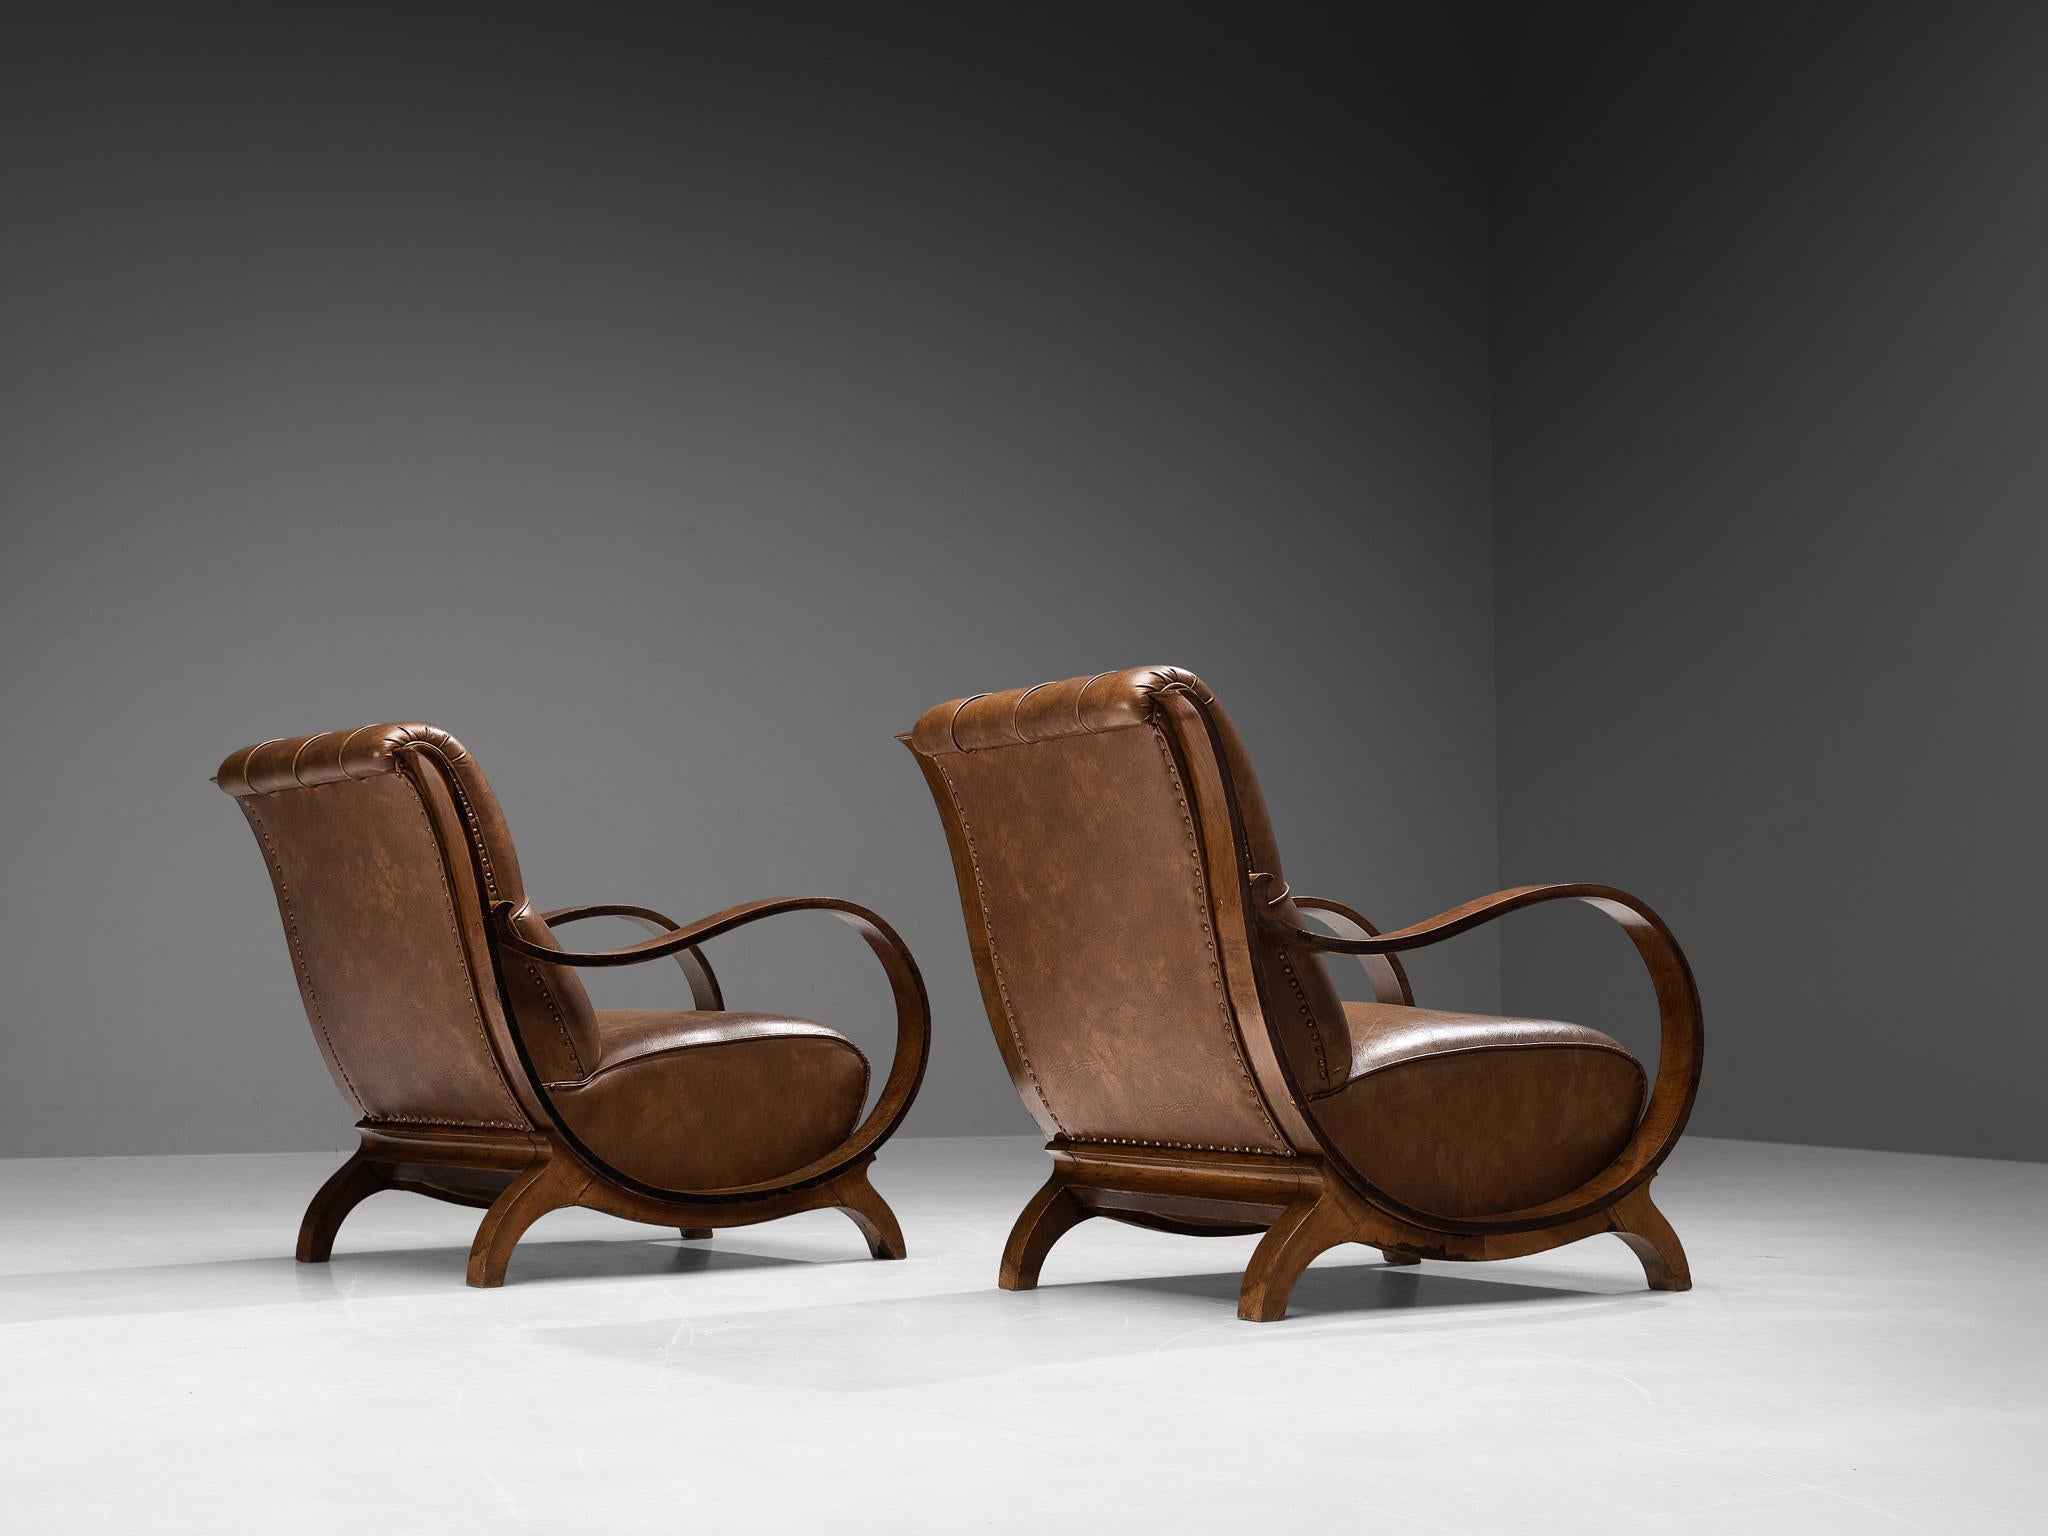 Mid-20th Century Italian Art Deco Lounge Chairs with Ottoman in Walnut and Leather